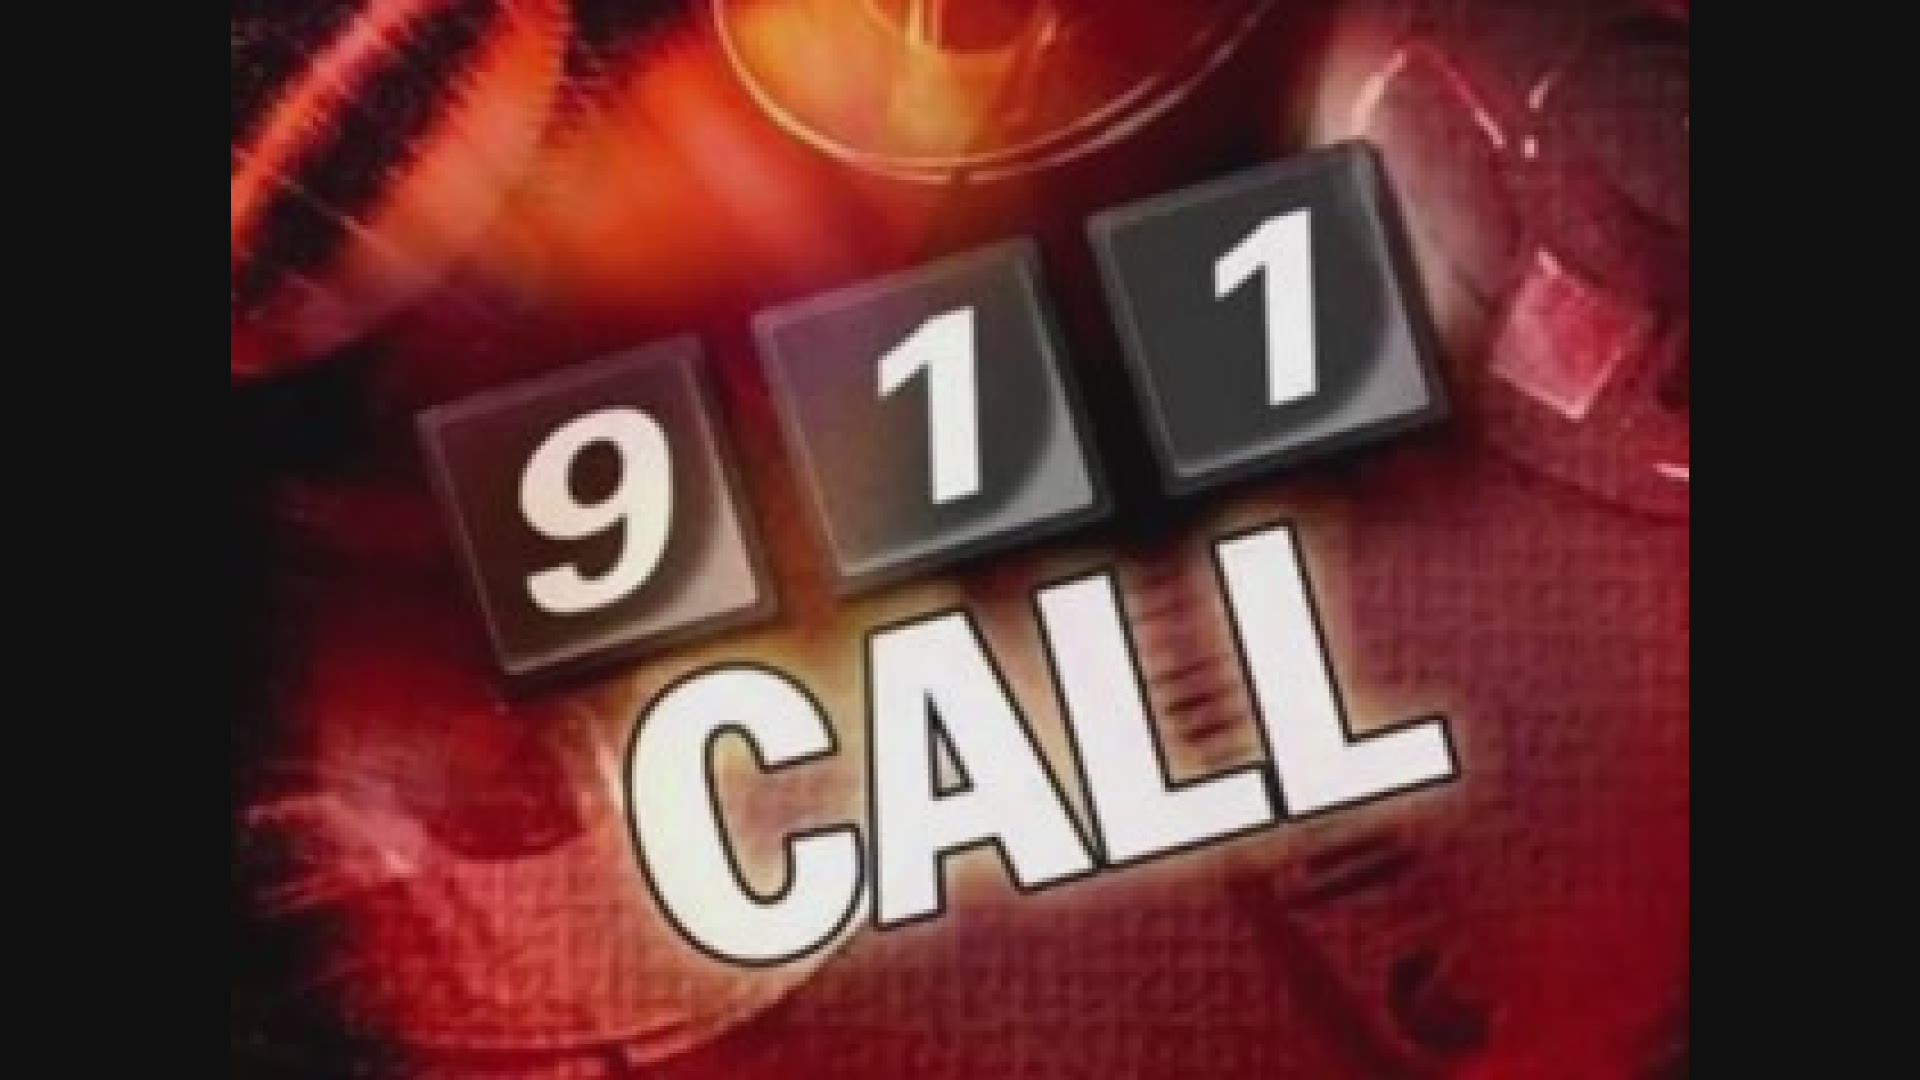 911 call reporting fire at Rocky River condominiums